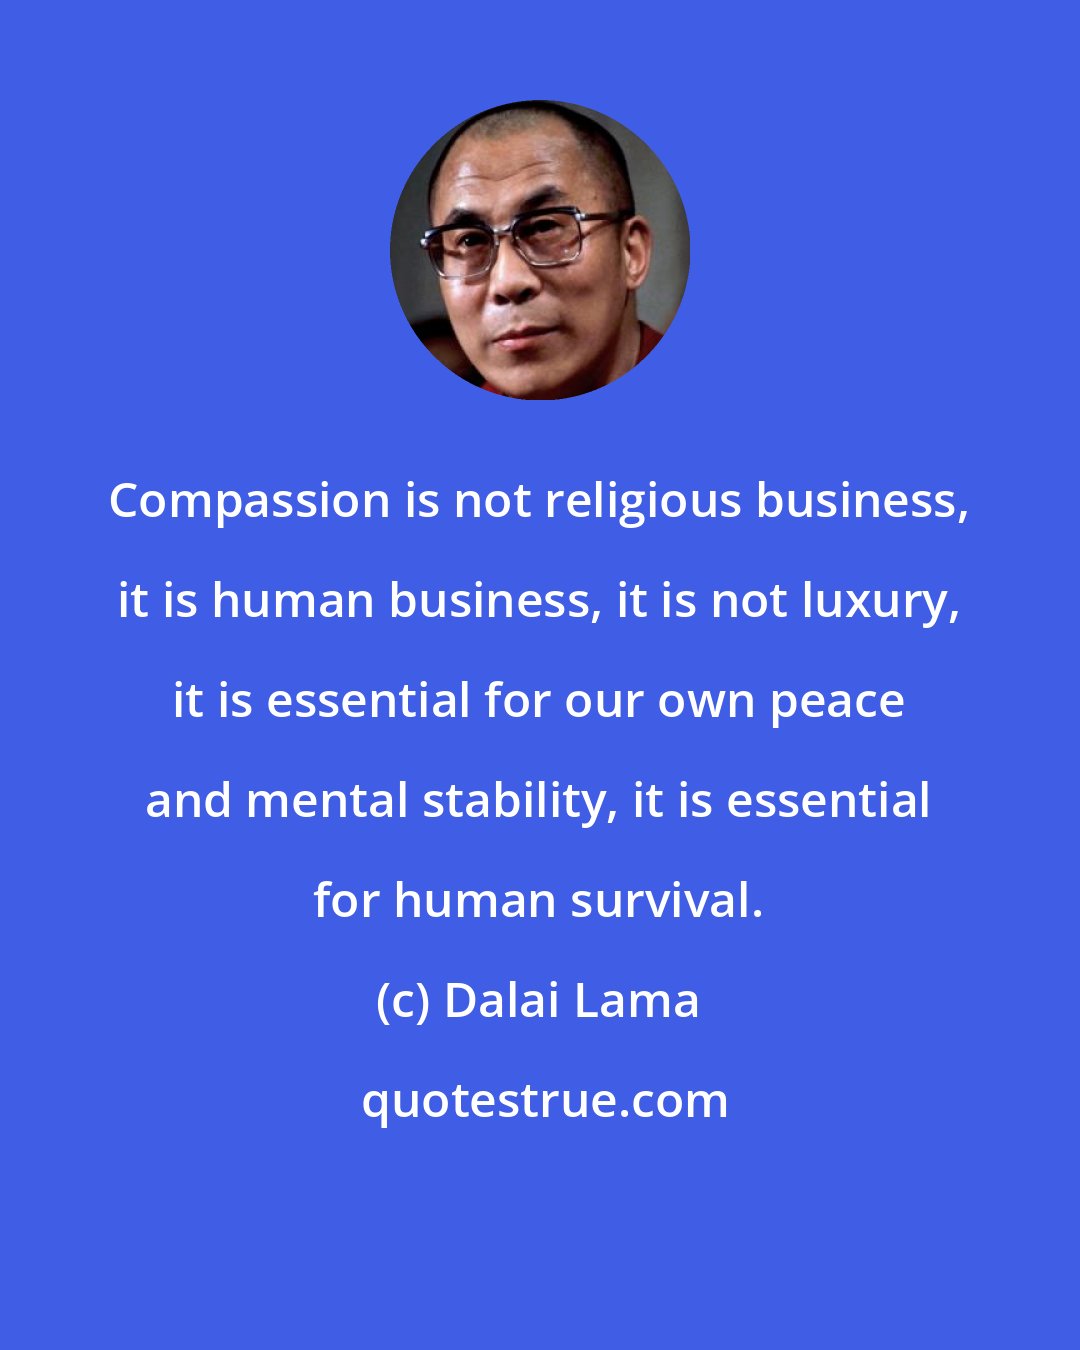 Dalai Lama: Compassion is not religious business, it is human business, it is not luxury, it is essential for our own peace and mental stability, it is essential for human survival.